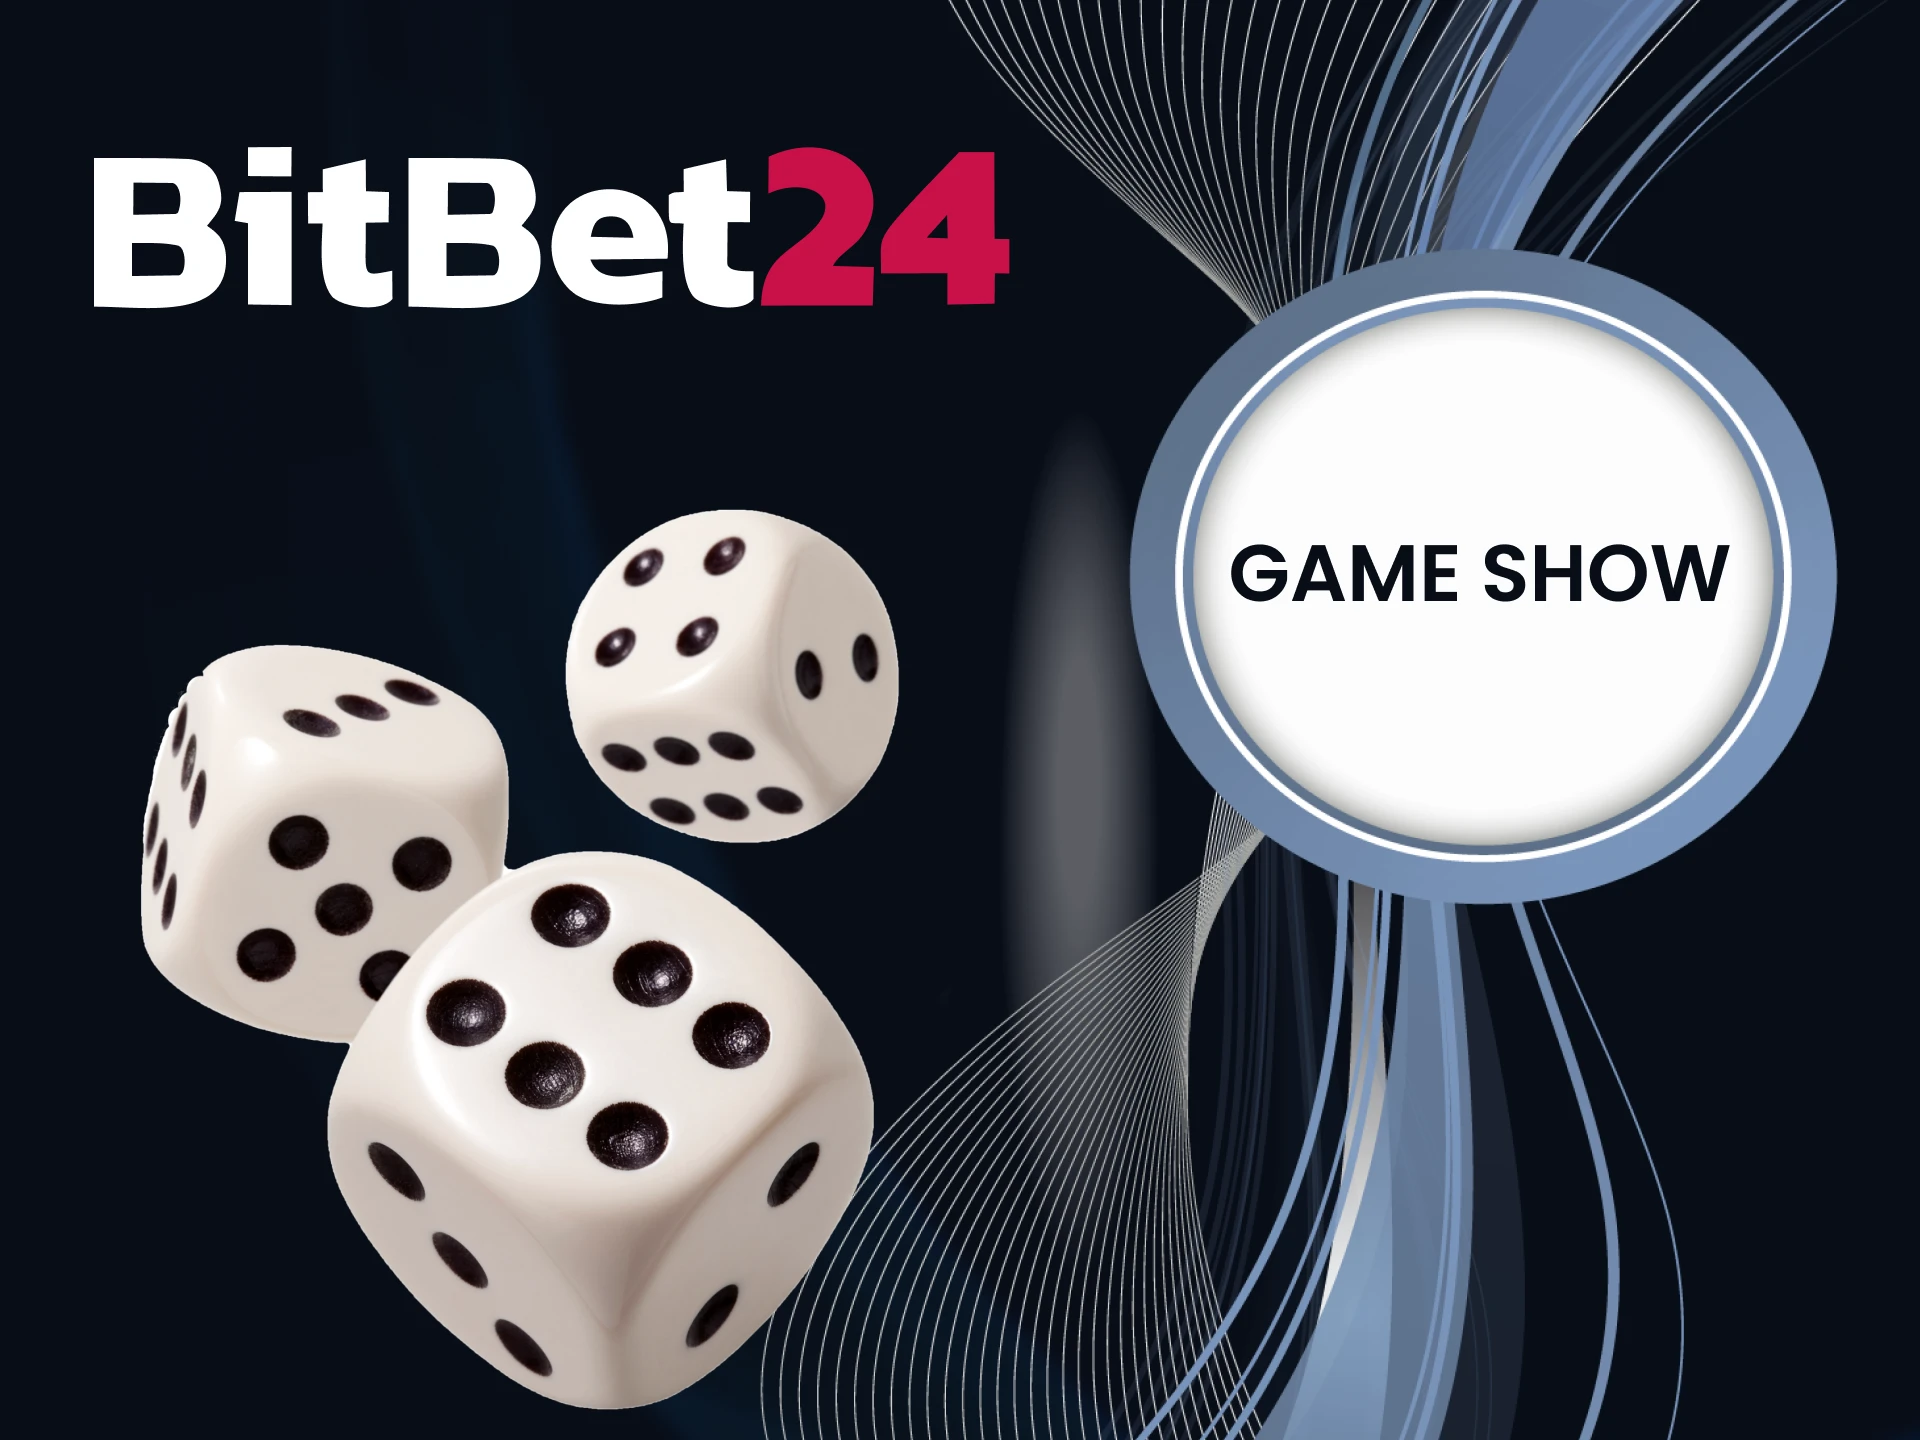 With BitBet24, try playing the game show.